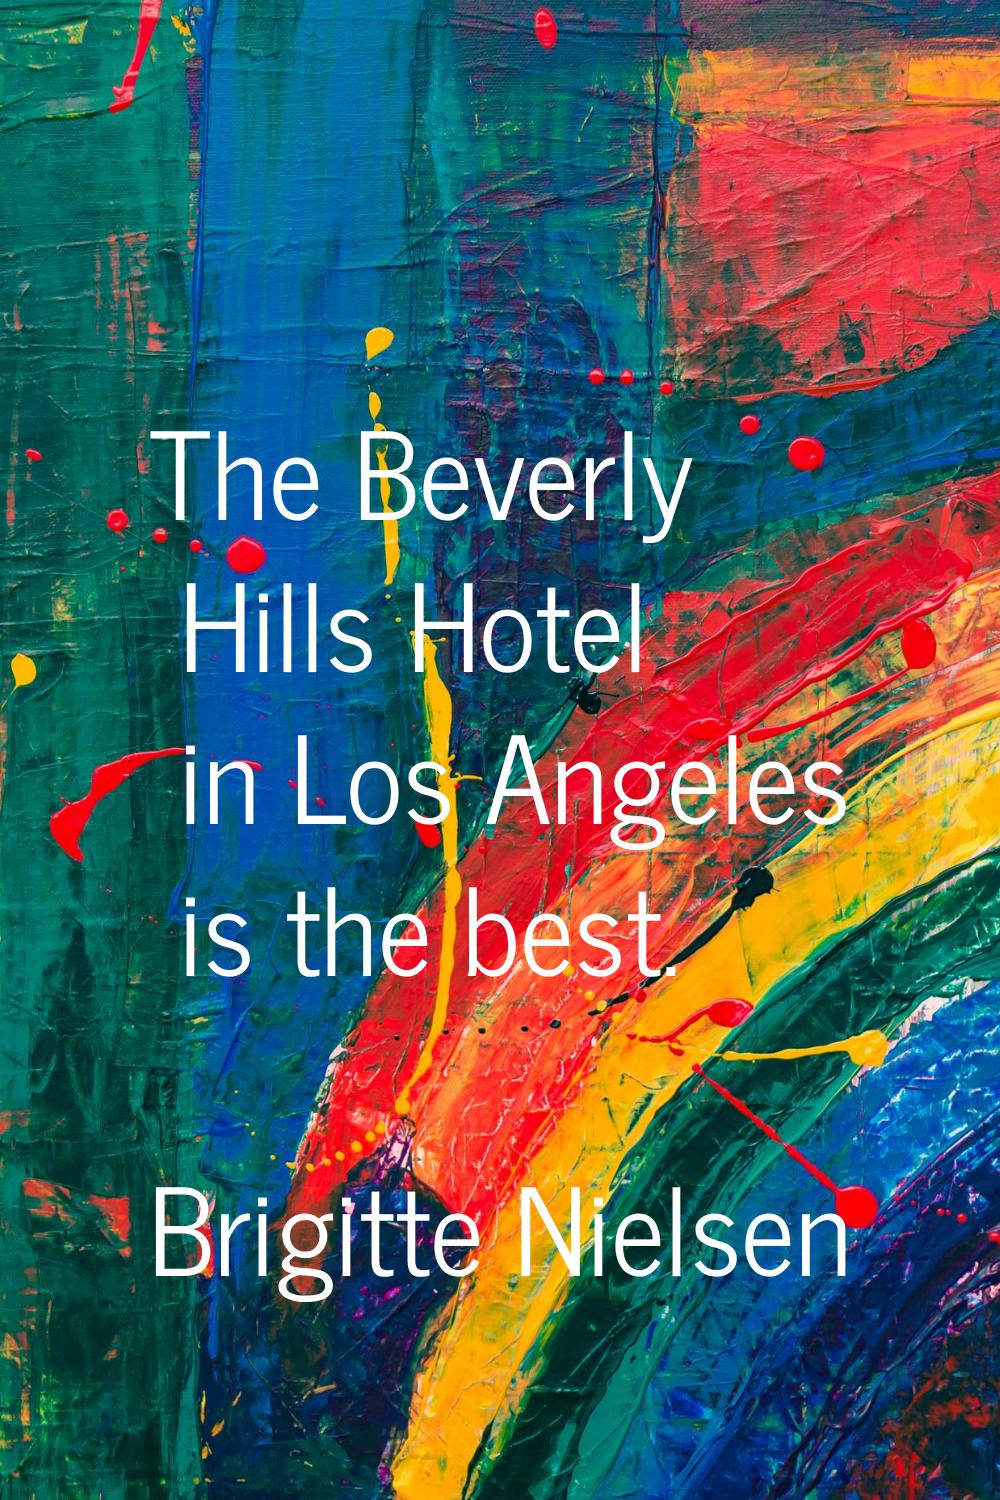 The Beverly Hills Hotel in Los Angeles is the best.